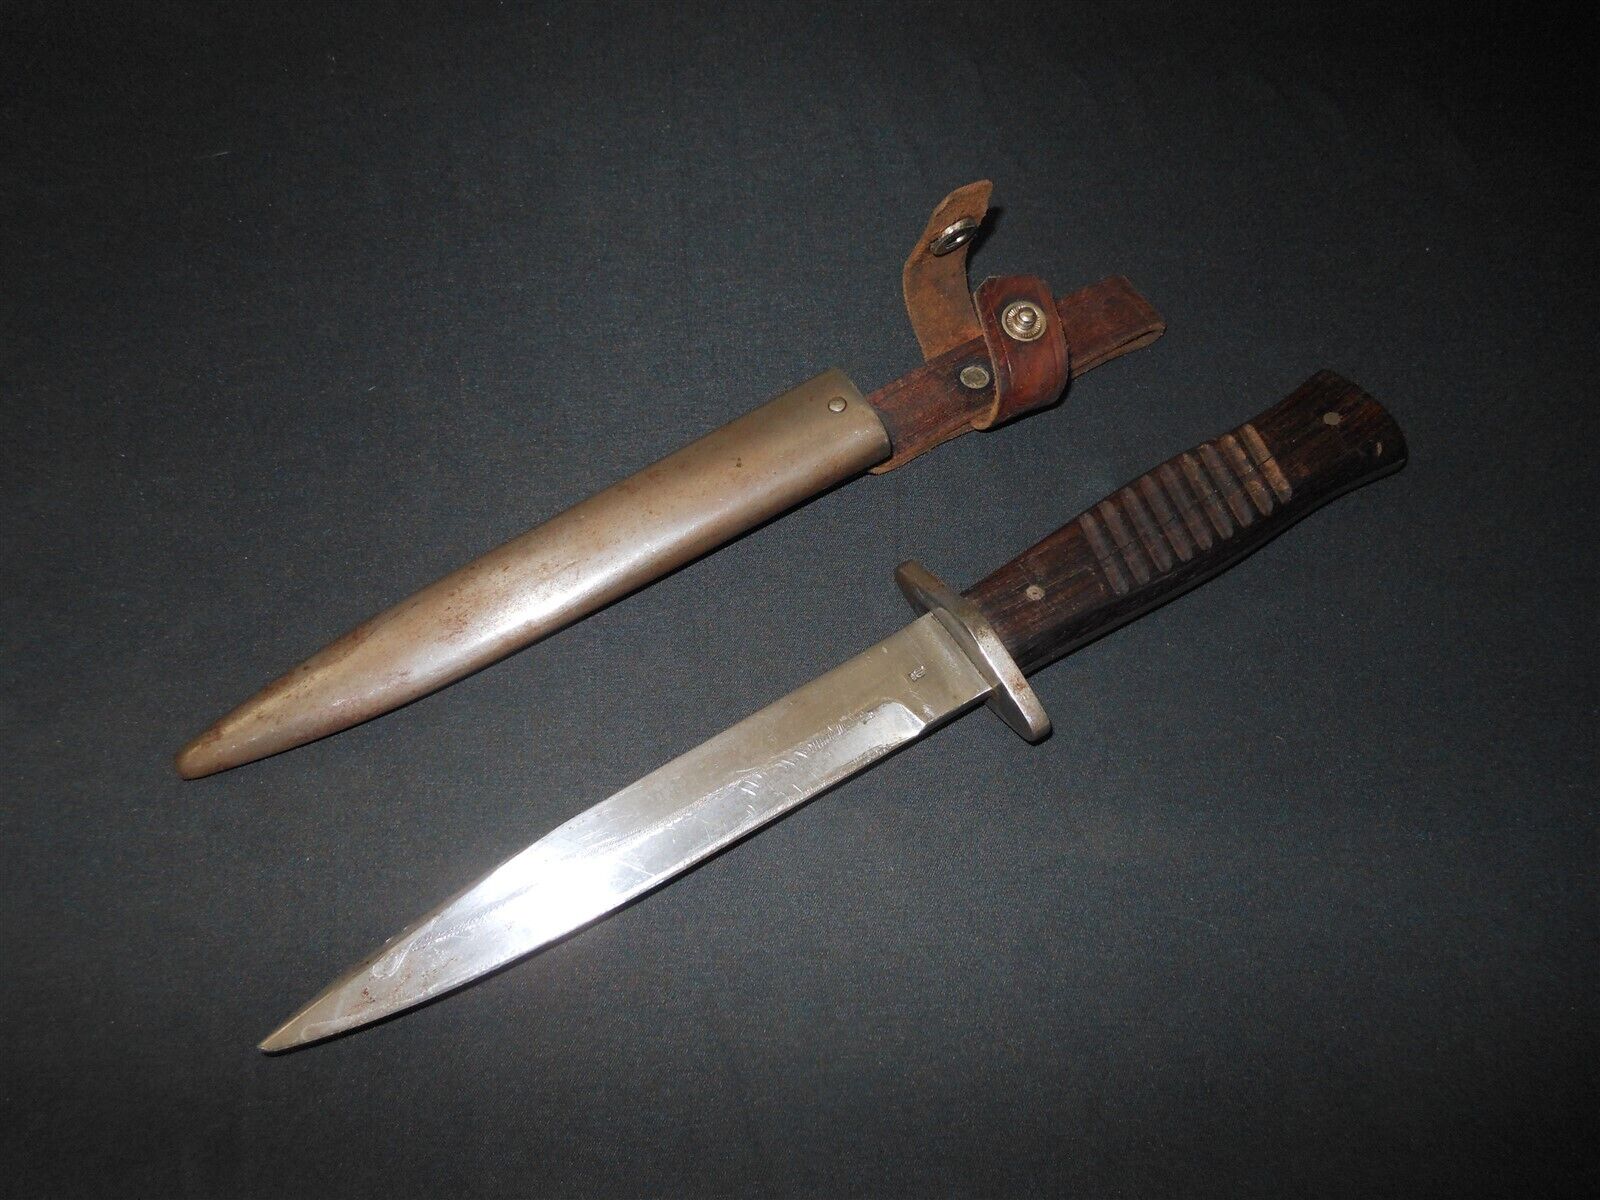 WW1 German Nahkampfmesser - COMBAT BOOT KNIFE / TRENCH KNIFE - REPRODUCTION